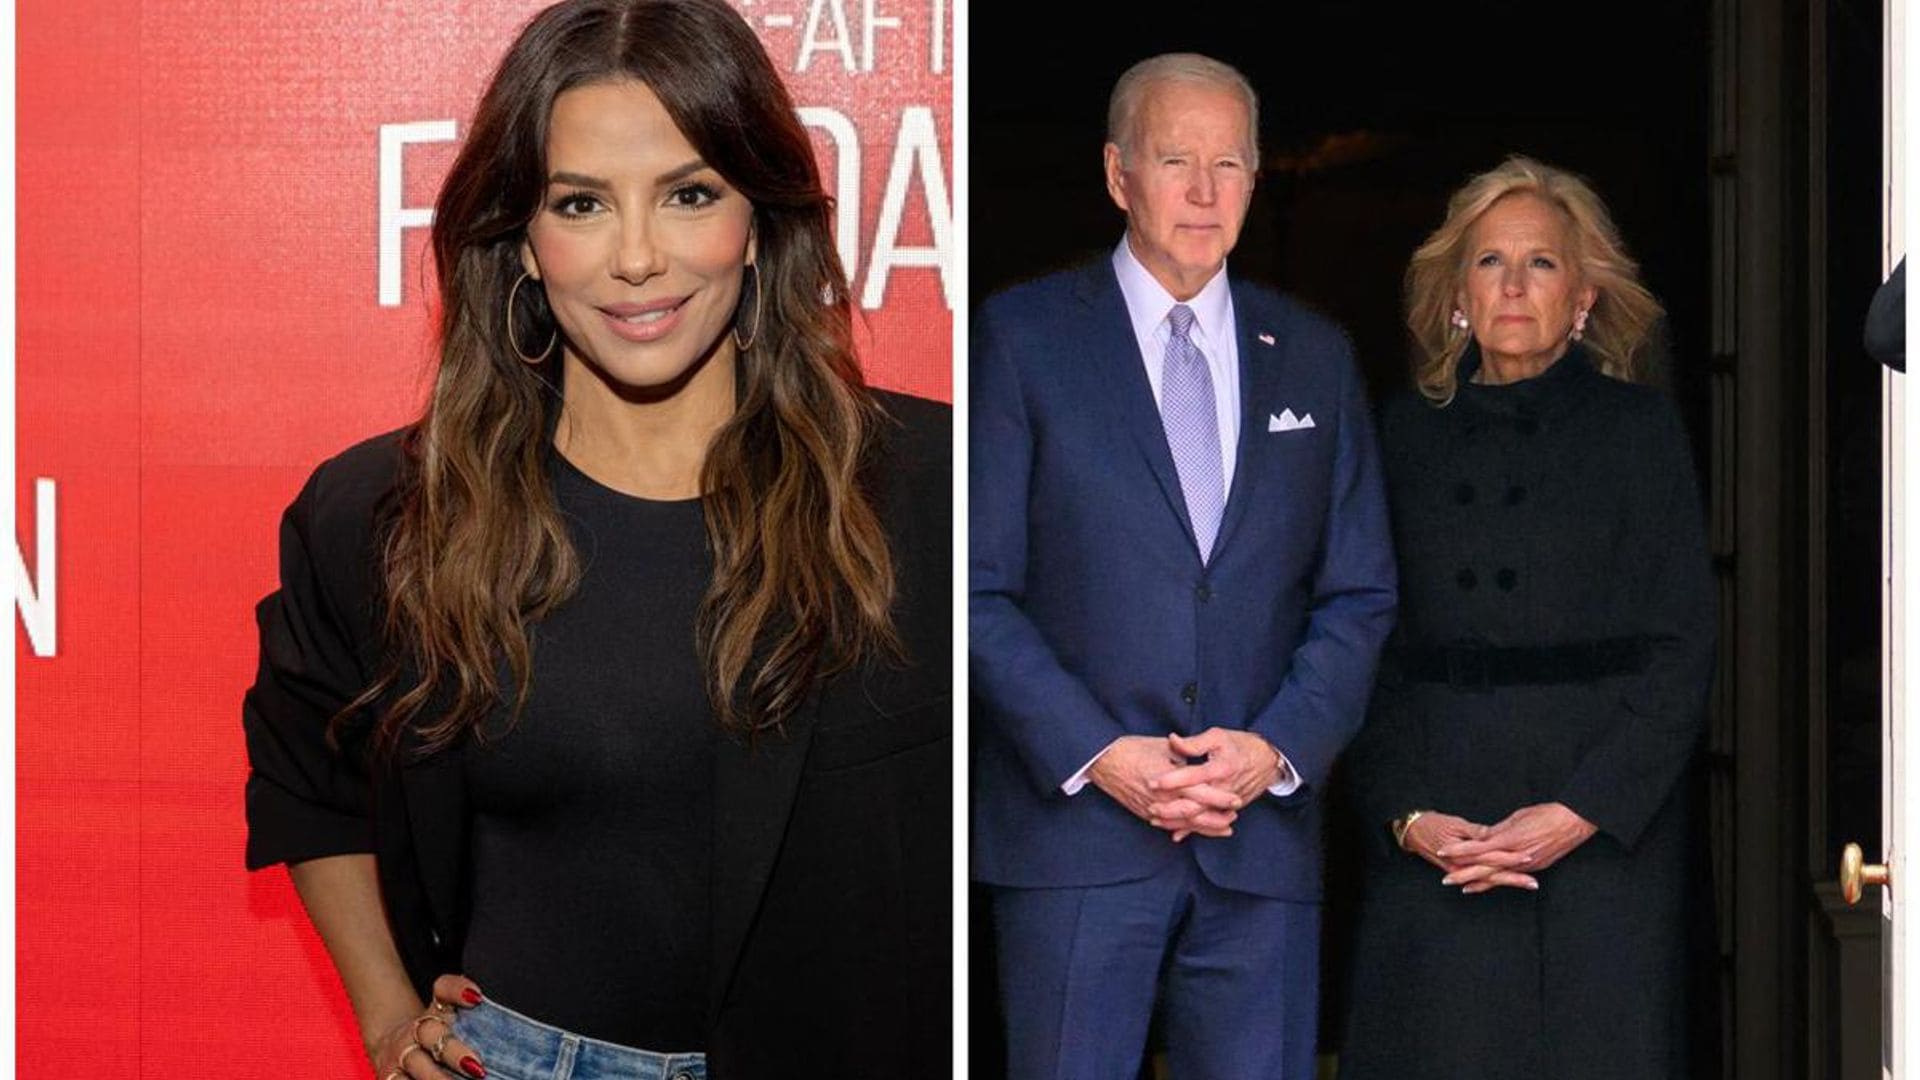 Eva Longoria at the White House: Celebrates the stories of Latinos in the U.S. with new film